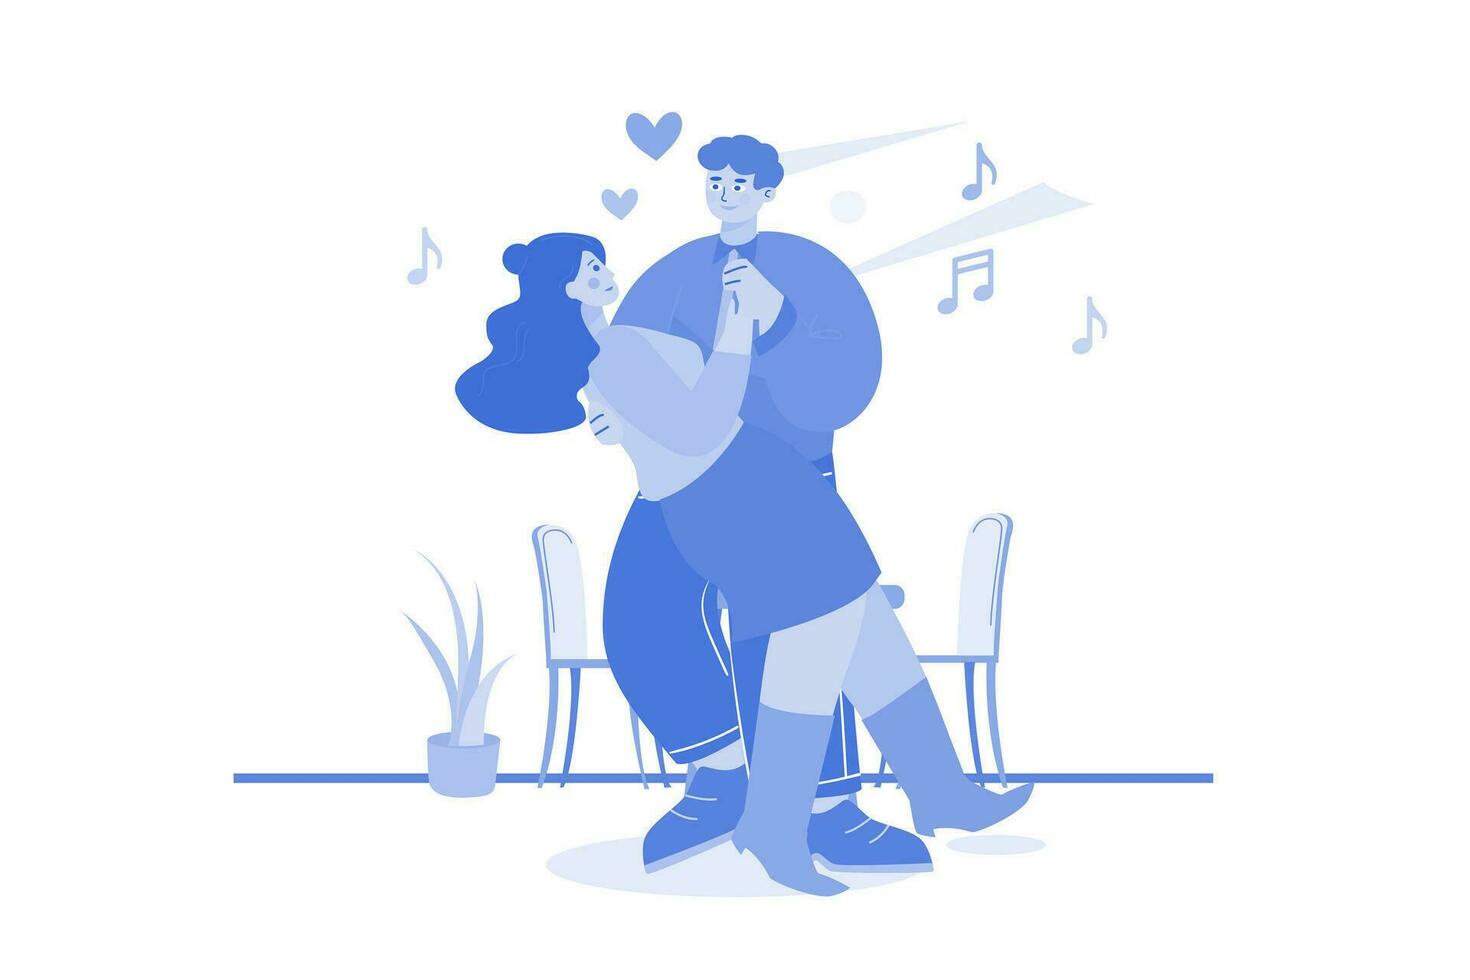 Couple Dancing Together Illustration concept on white background vector